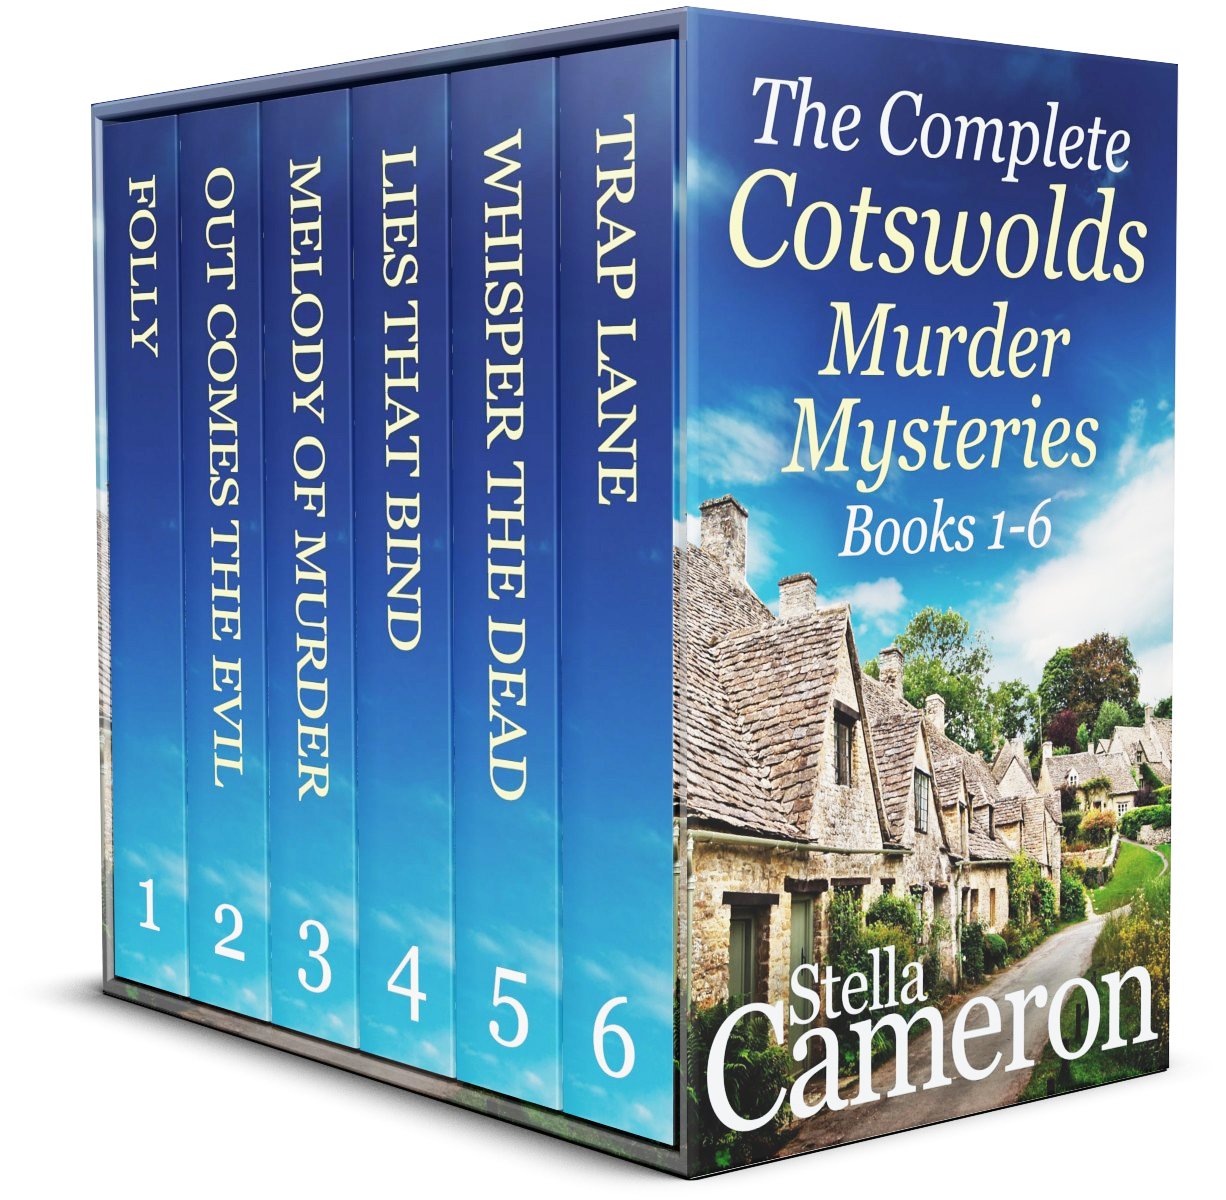 COMPLETE COTSWOLDS MURDER MYSTERIES 592k cover publish.jpg